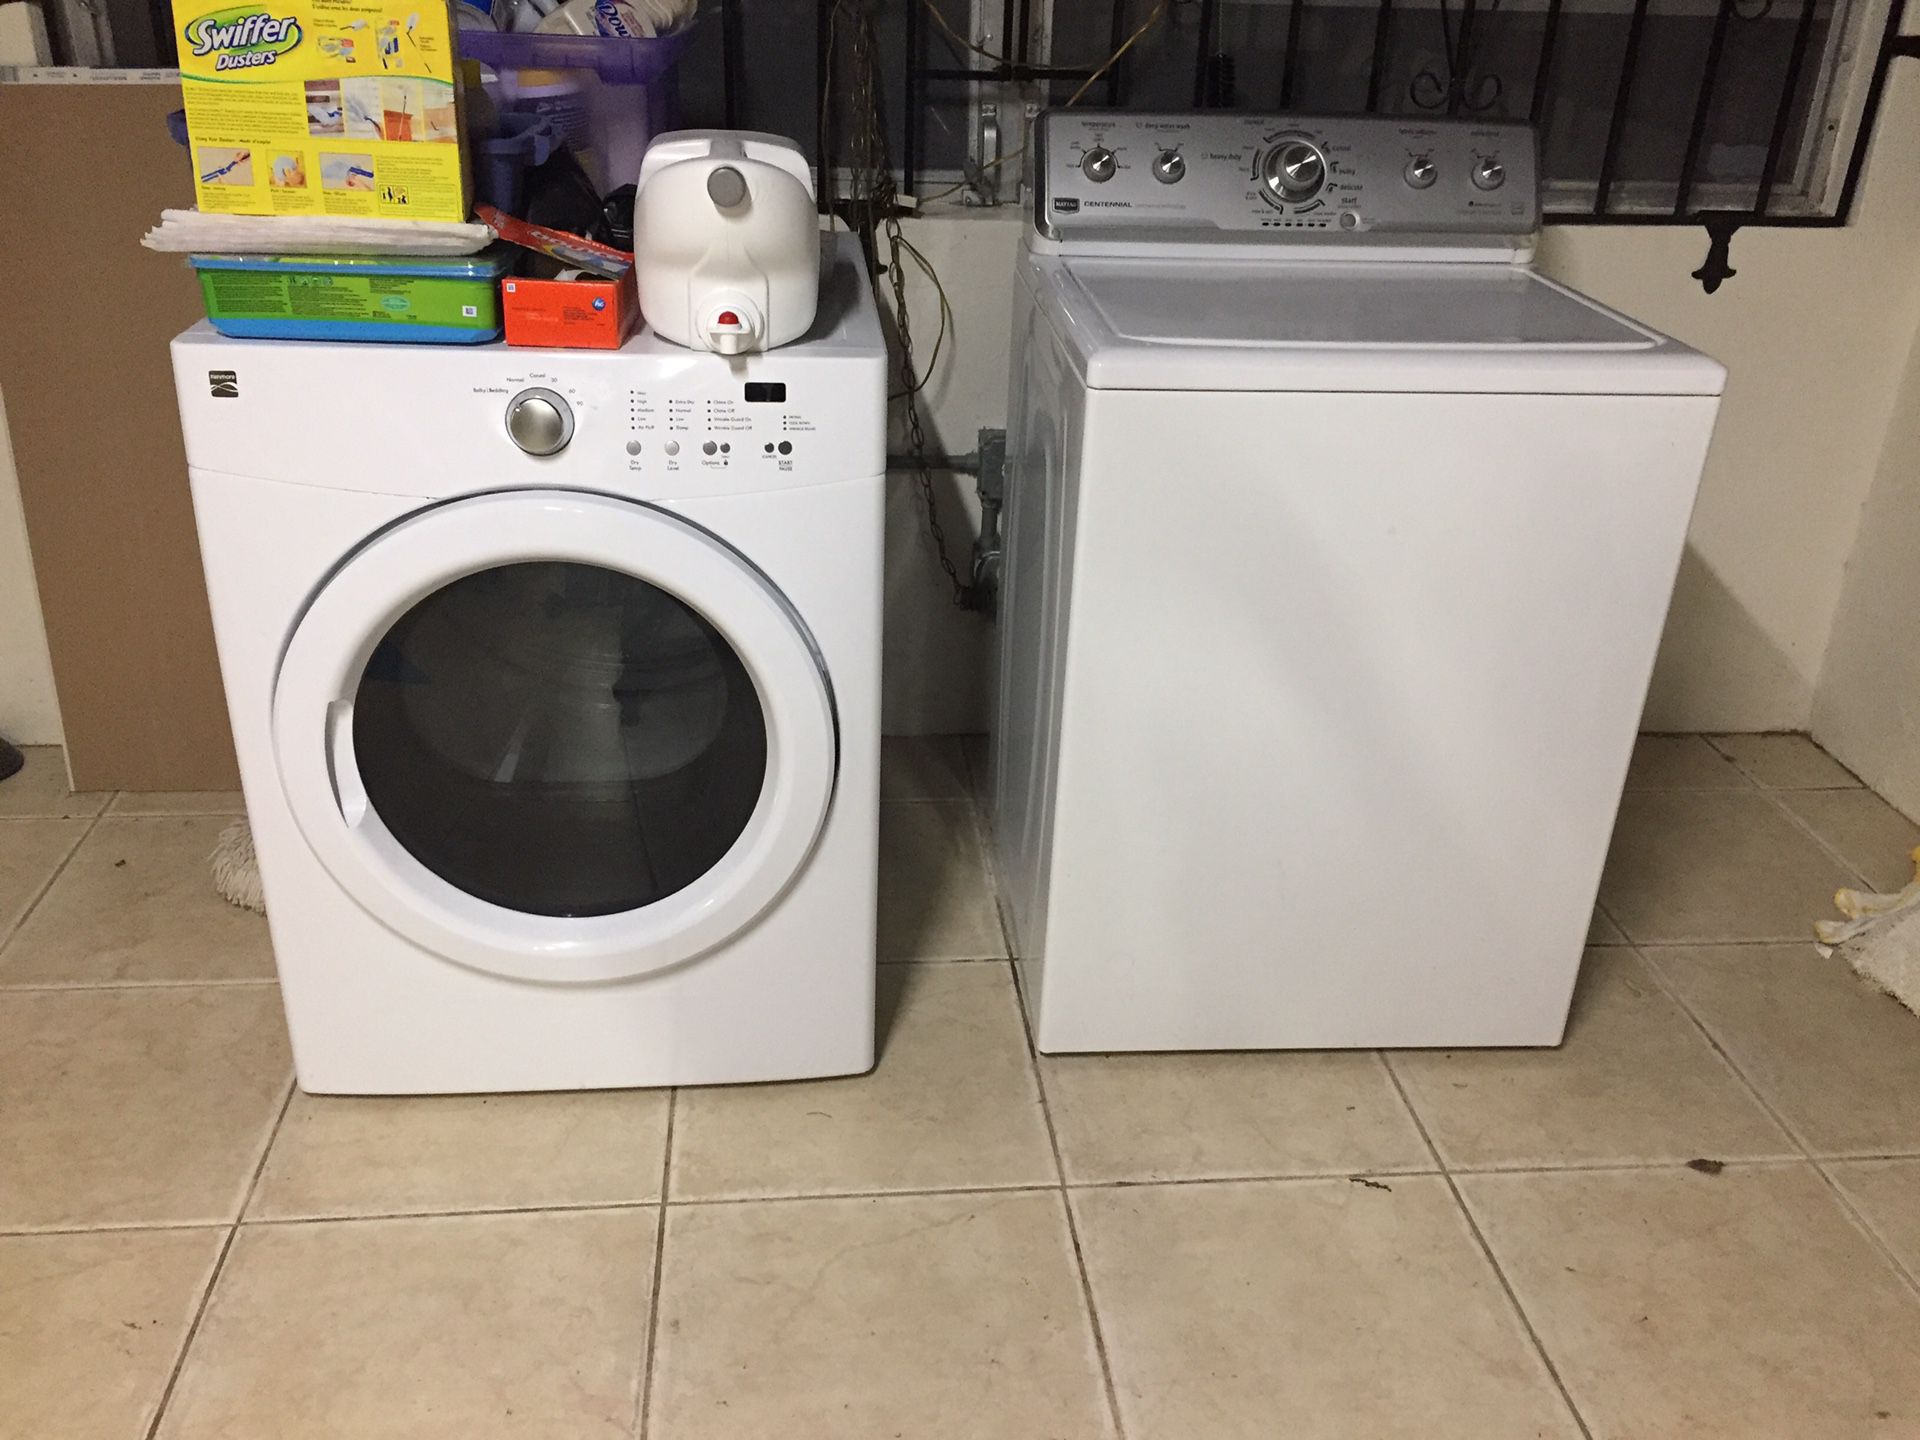 Kenmore dryer and Maytag washer